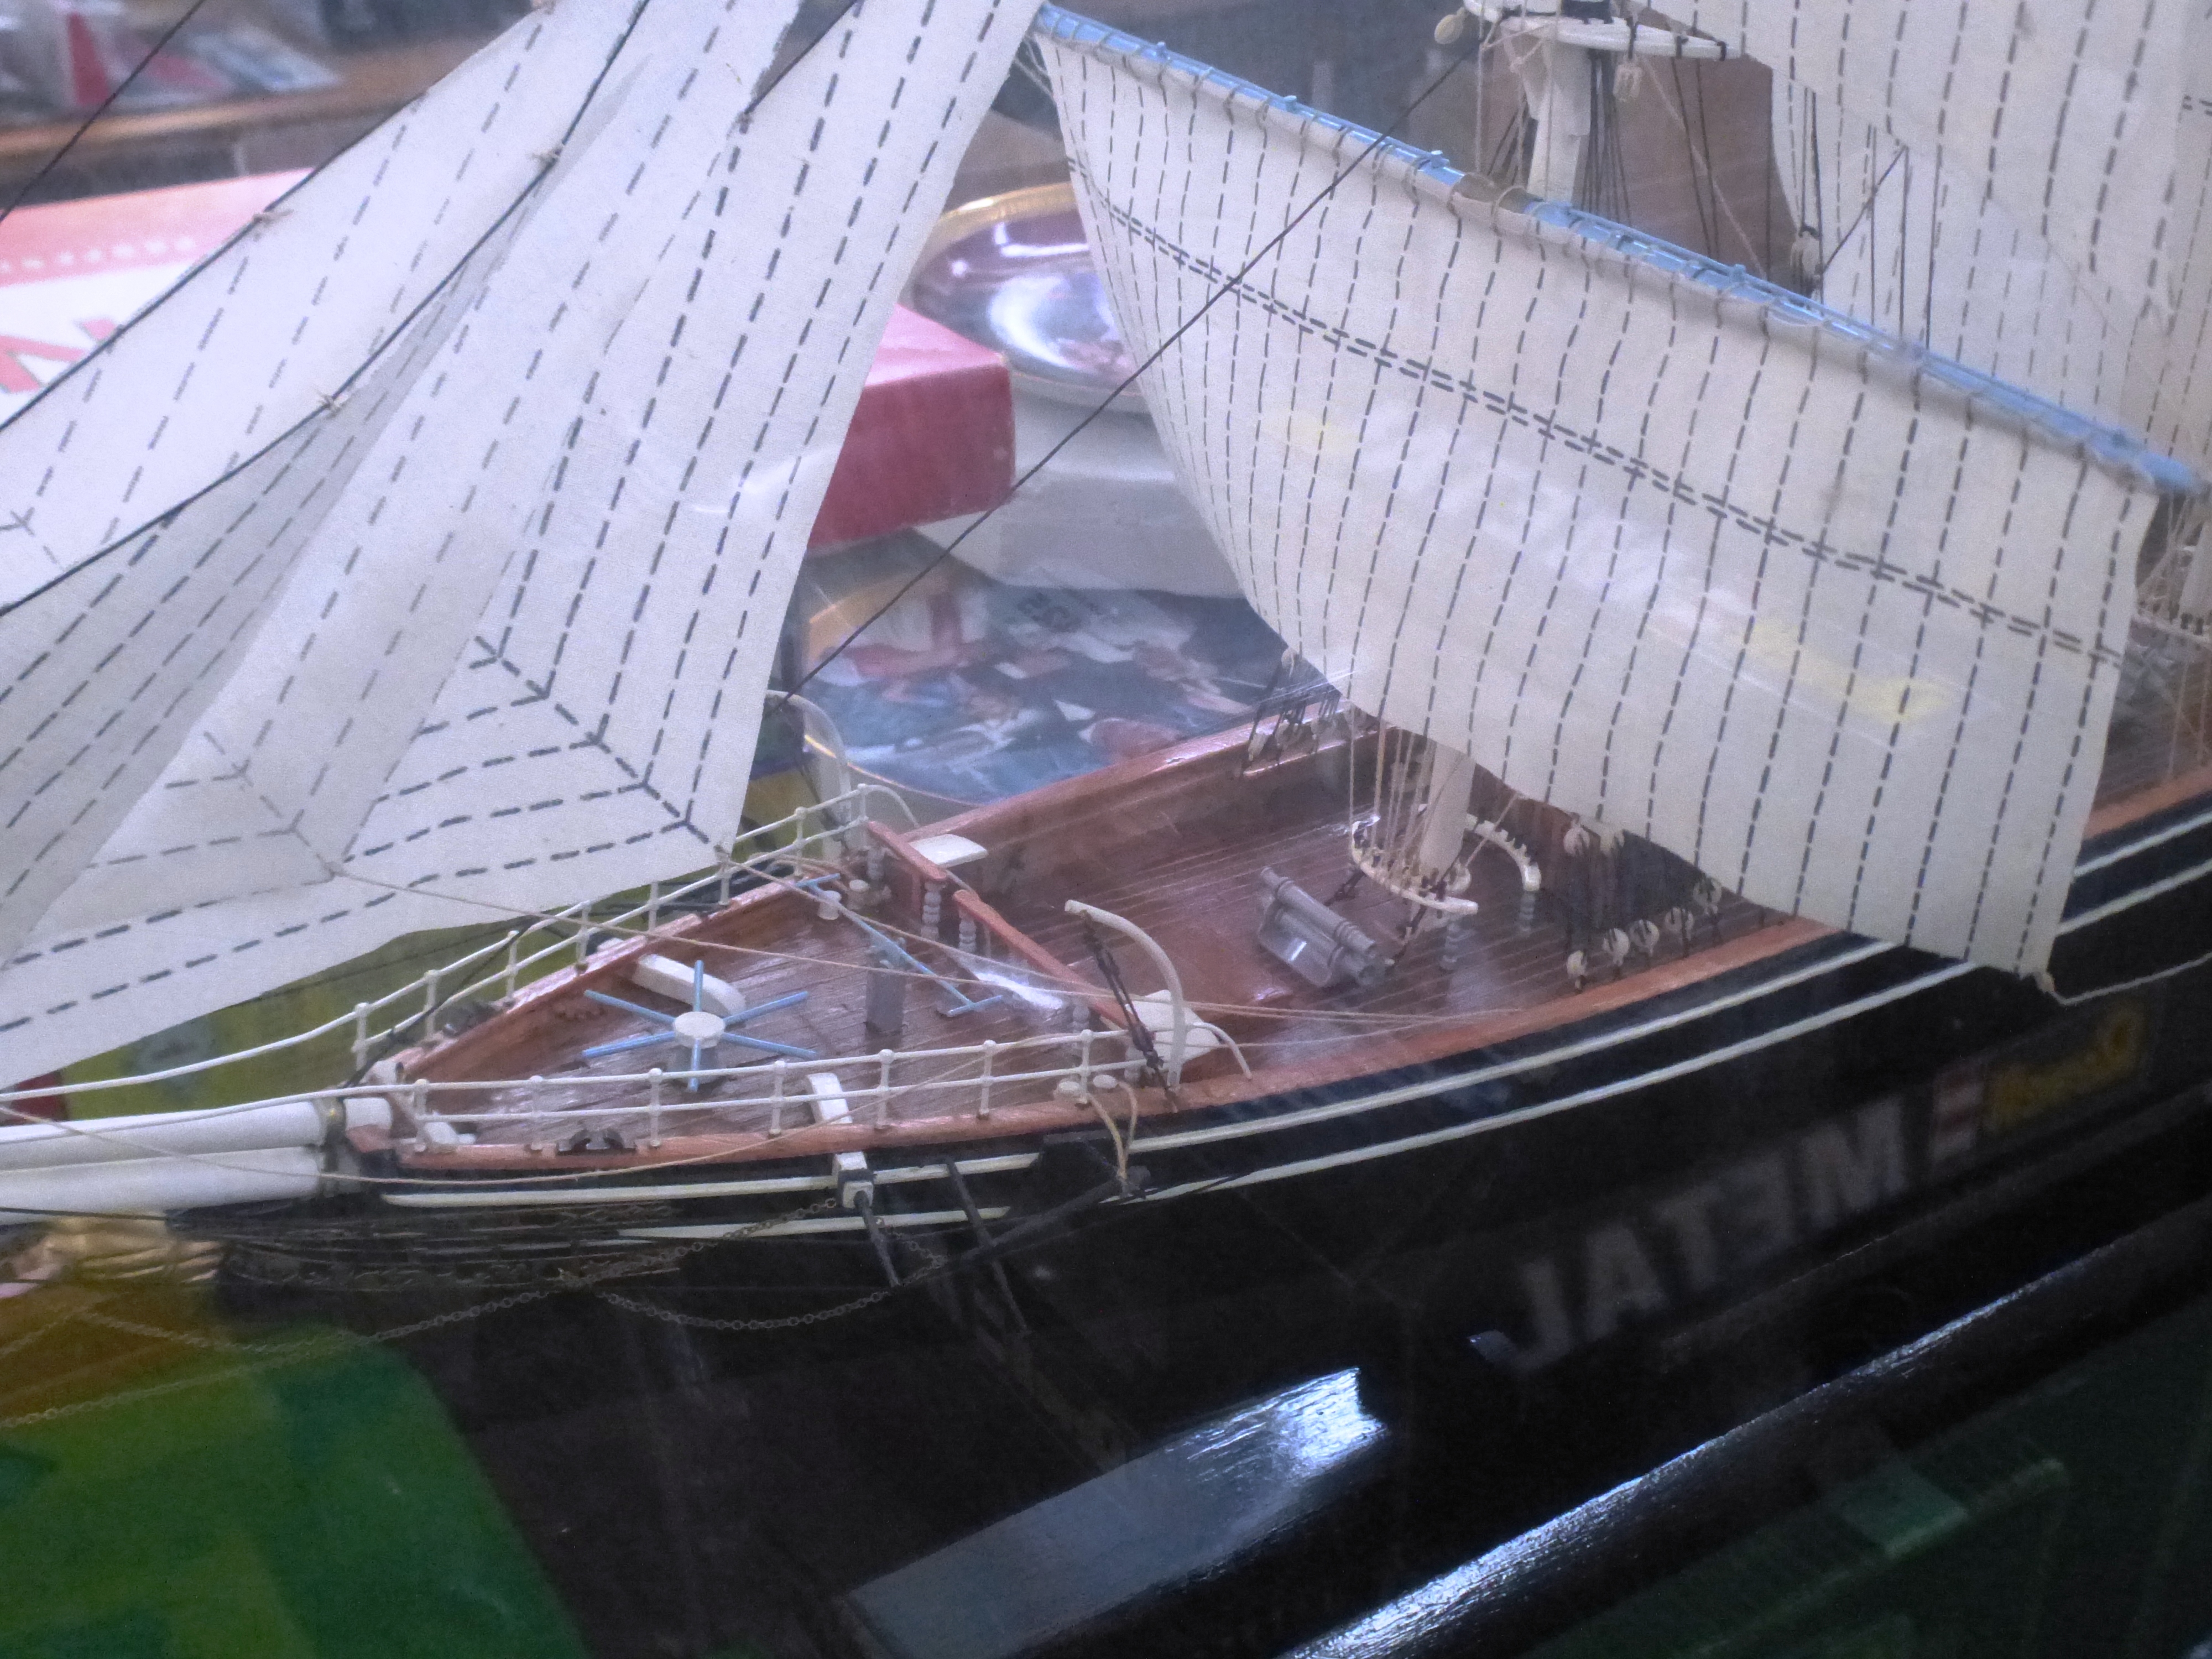 LARGE MODEL CUTTY SARK BOAT IN DISPLAY CASE - Image 2 of 4